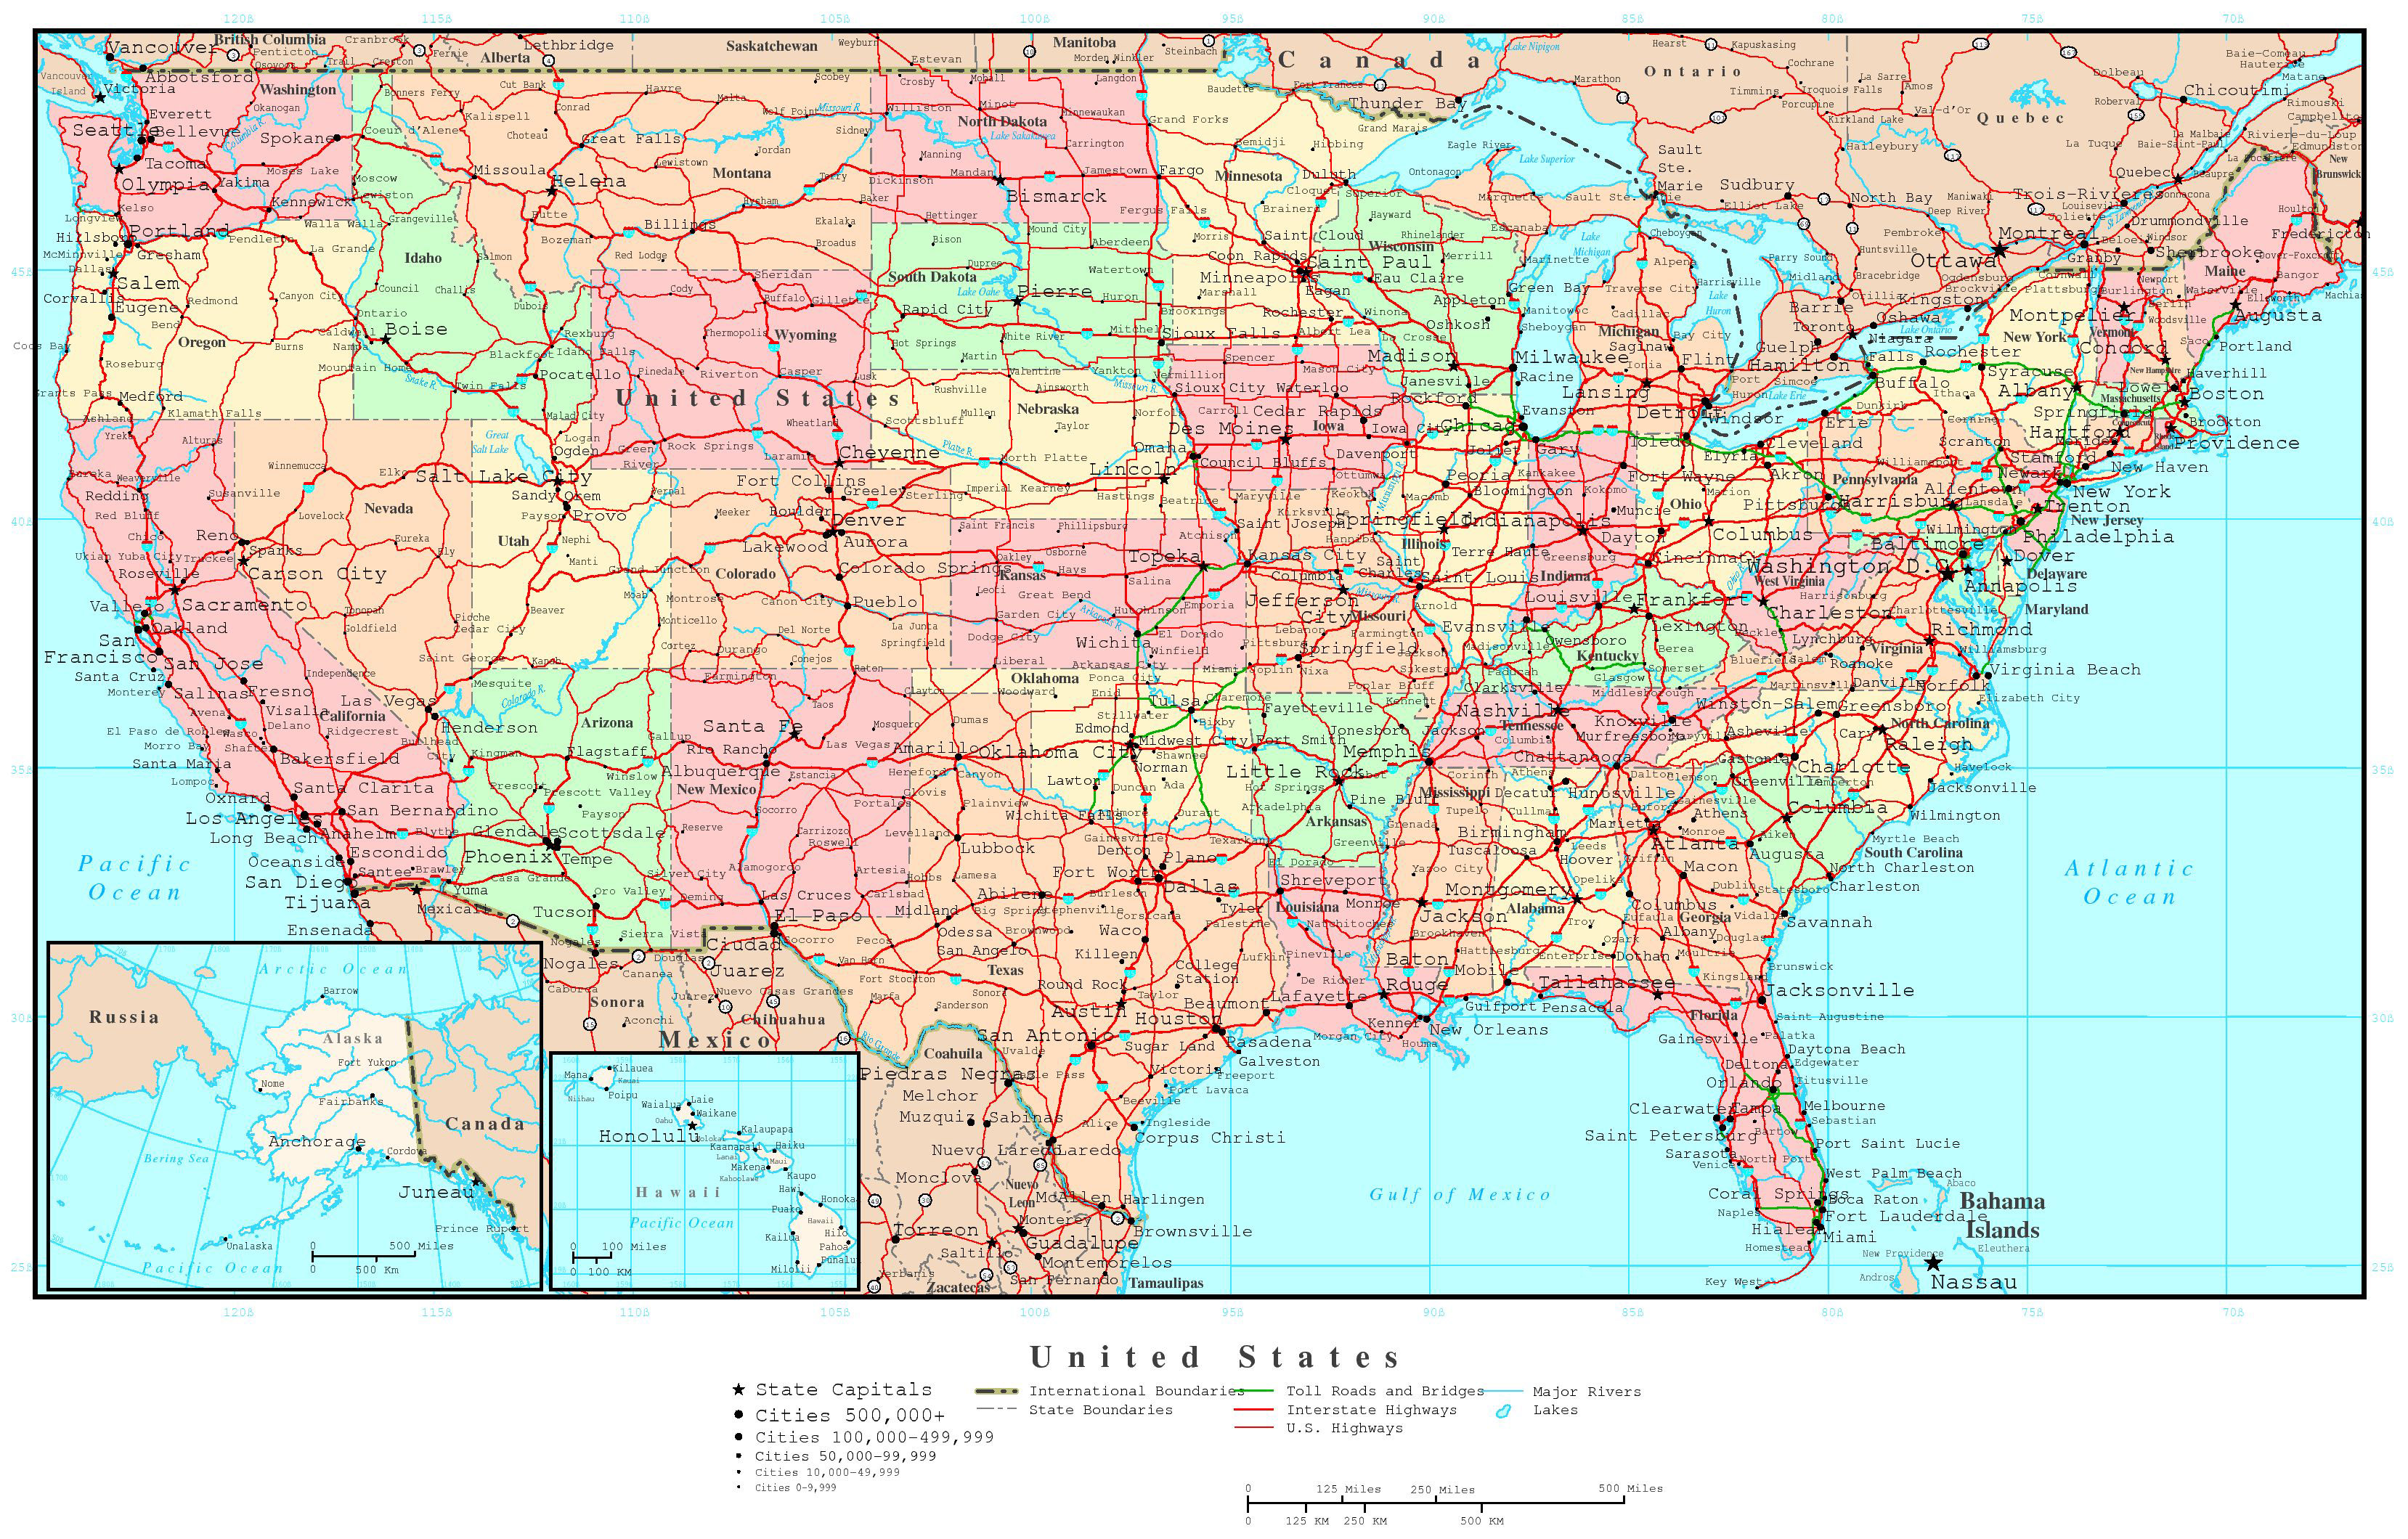 large map of the united states Large Detailed Political And Road Map Of The Usa The Usa Large large map of the united states